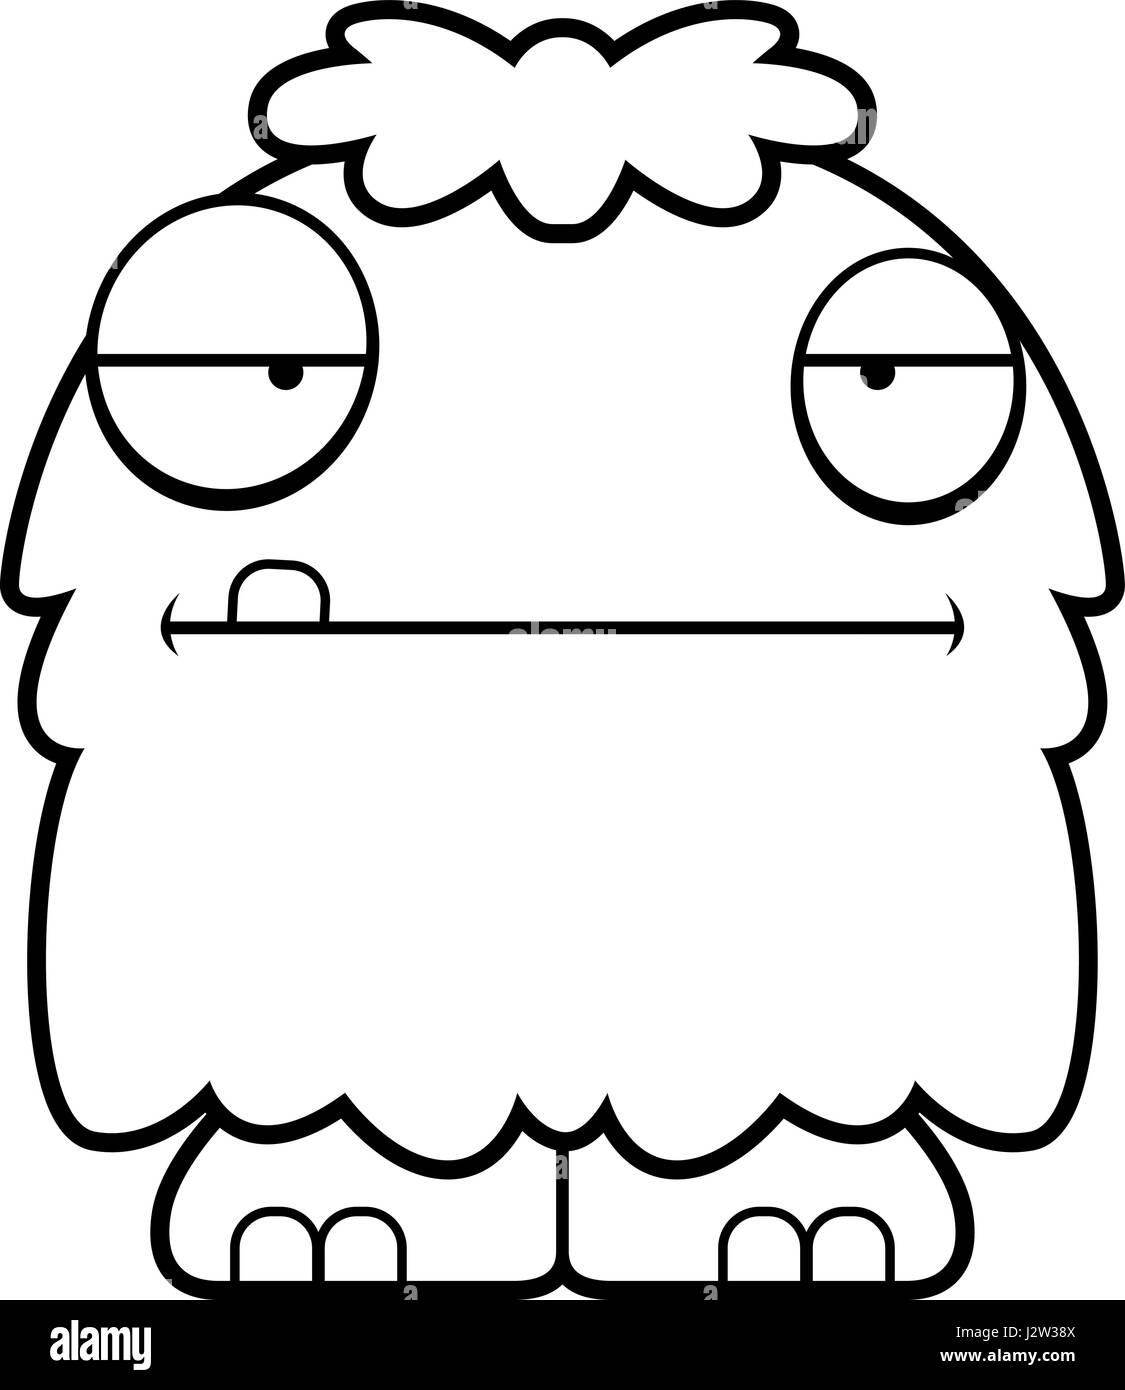 monster face clipart black and white